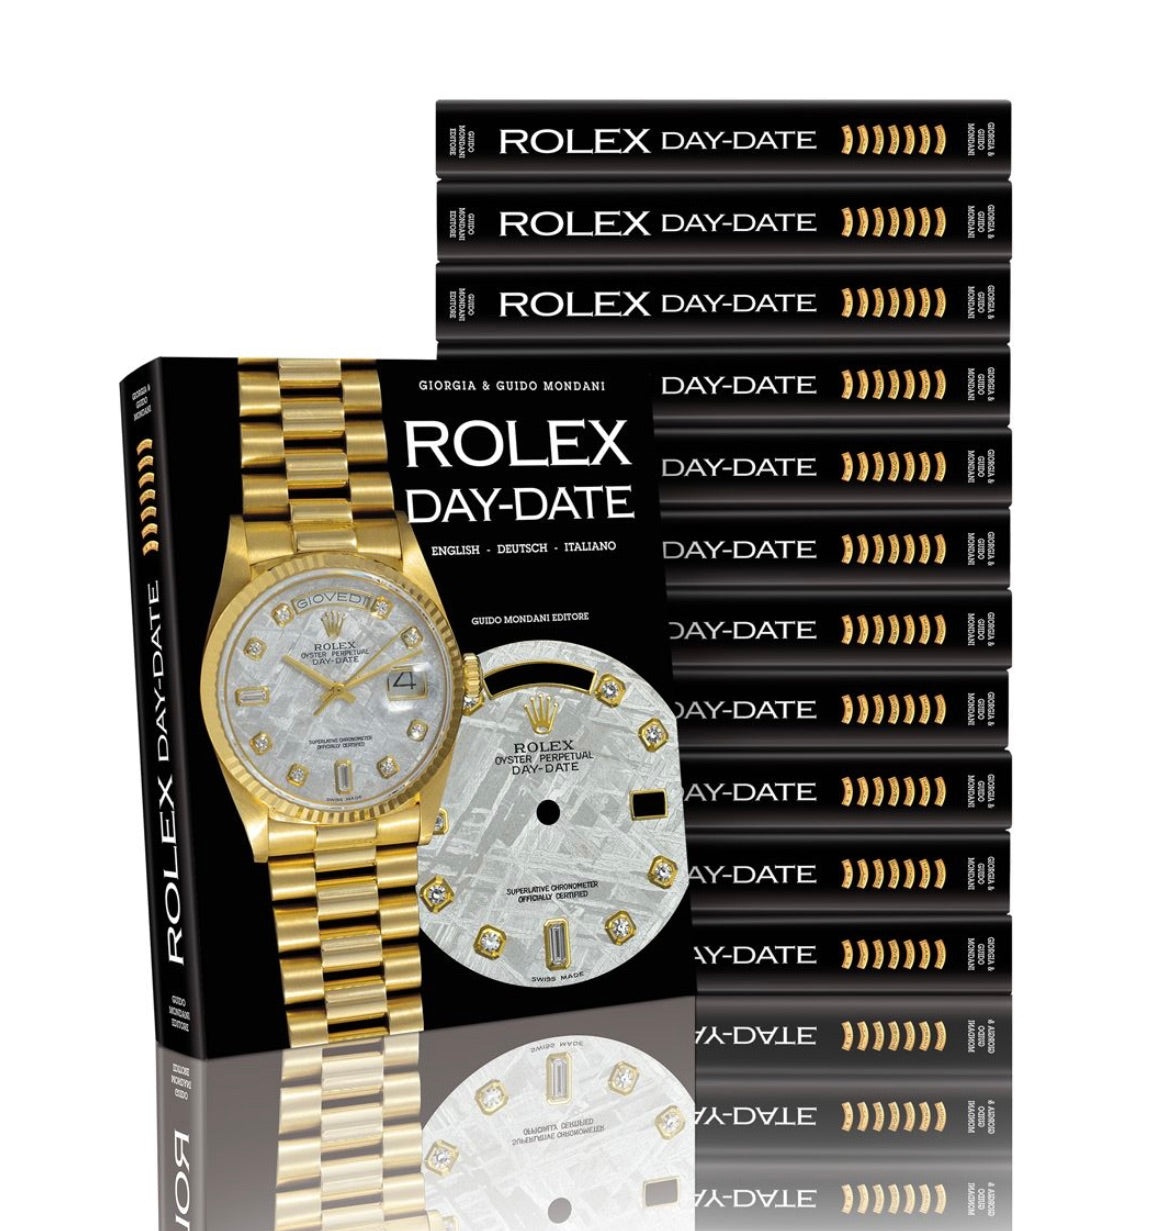 Rolex Day-Date Book Updated to 2023